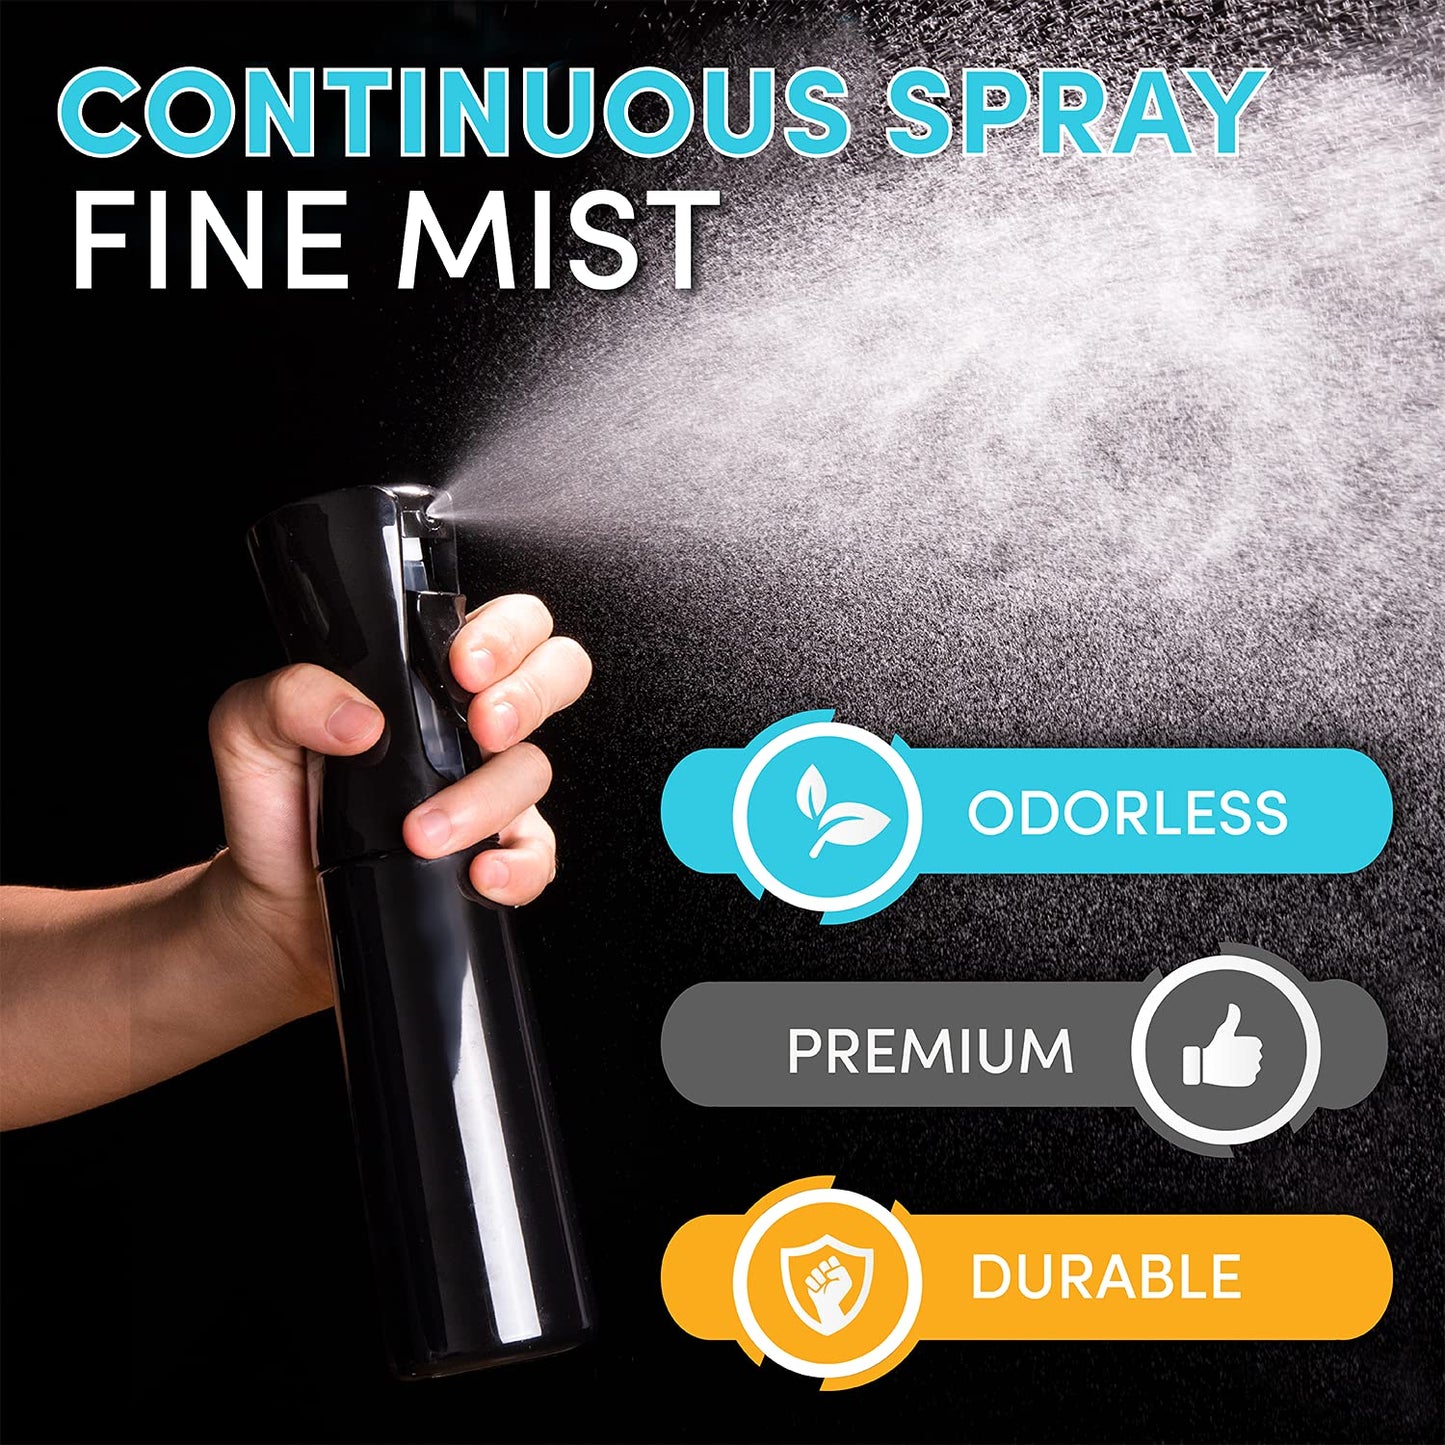 Hula Home Continuous Spray Bottle for Hair (10.1oz/300ml) Mist Empty Ultra Fine Plastic Water Sprayer – For Hairstyling, Cleaning, Salons, Plants, Essential Oil Scents & More - Black